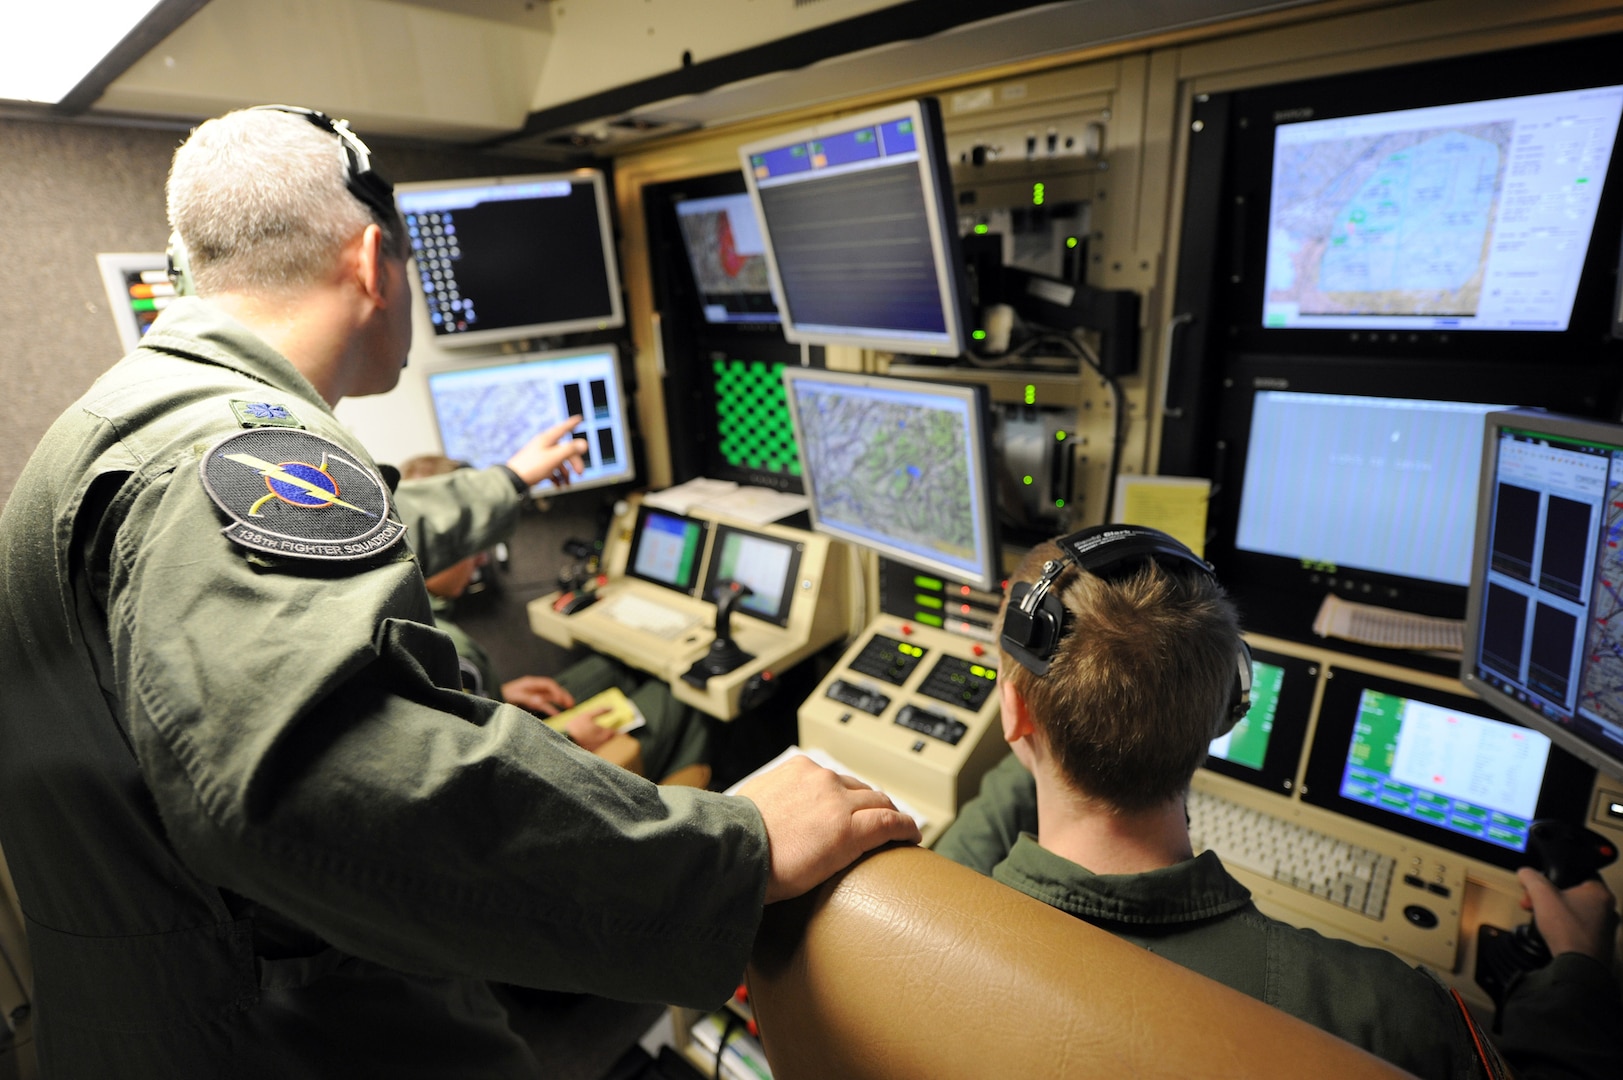 A student pilot and sensor operator, man the controls of a MQ-9 Reaper in a ground-based cockpit during a training mission flown from Hancock Field Air National Guard Base, New York. The 174th Fighter Wing is the only Air National Guard unit in the country to operate a MQ-9 Formal Training Unit to train aircrews from the active duty Air Force, Air National Guard and Air Force Reserve.